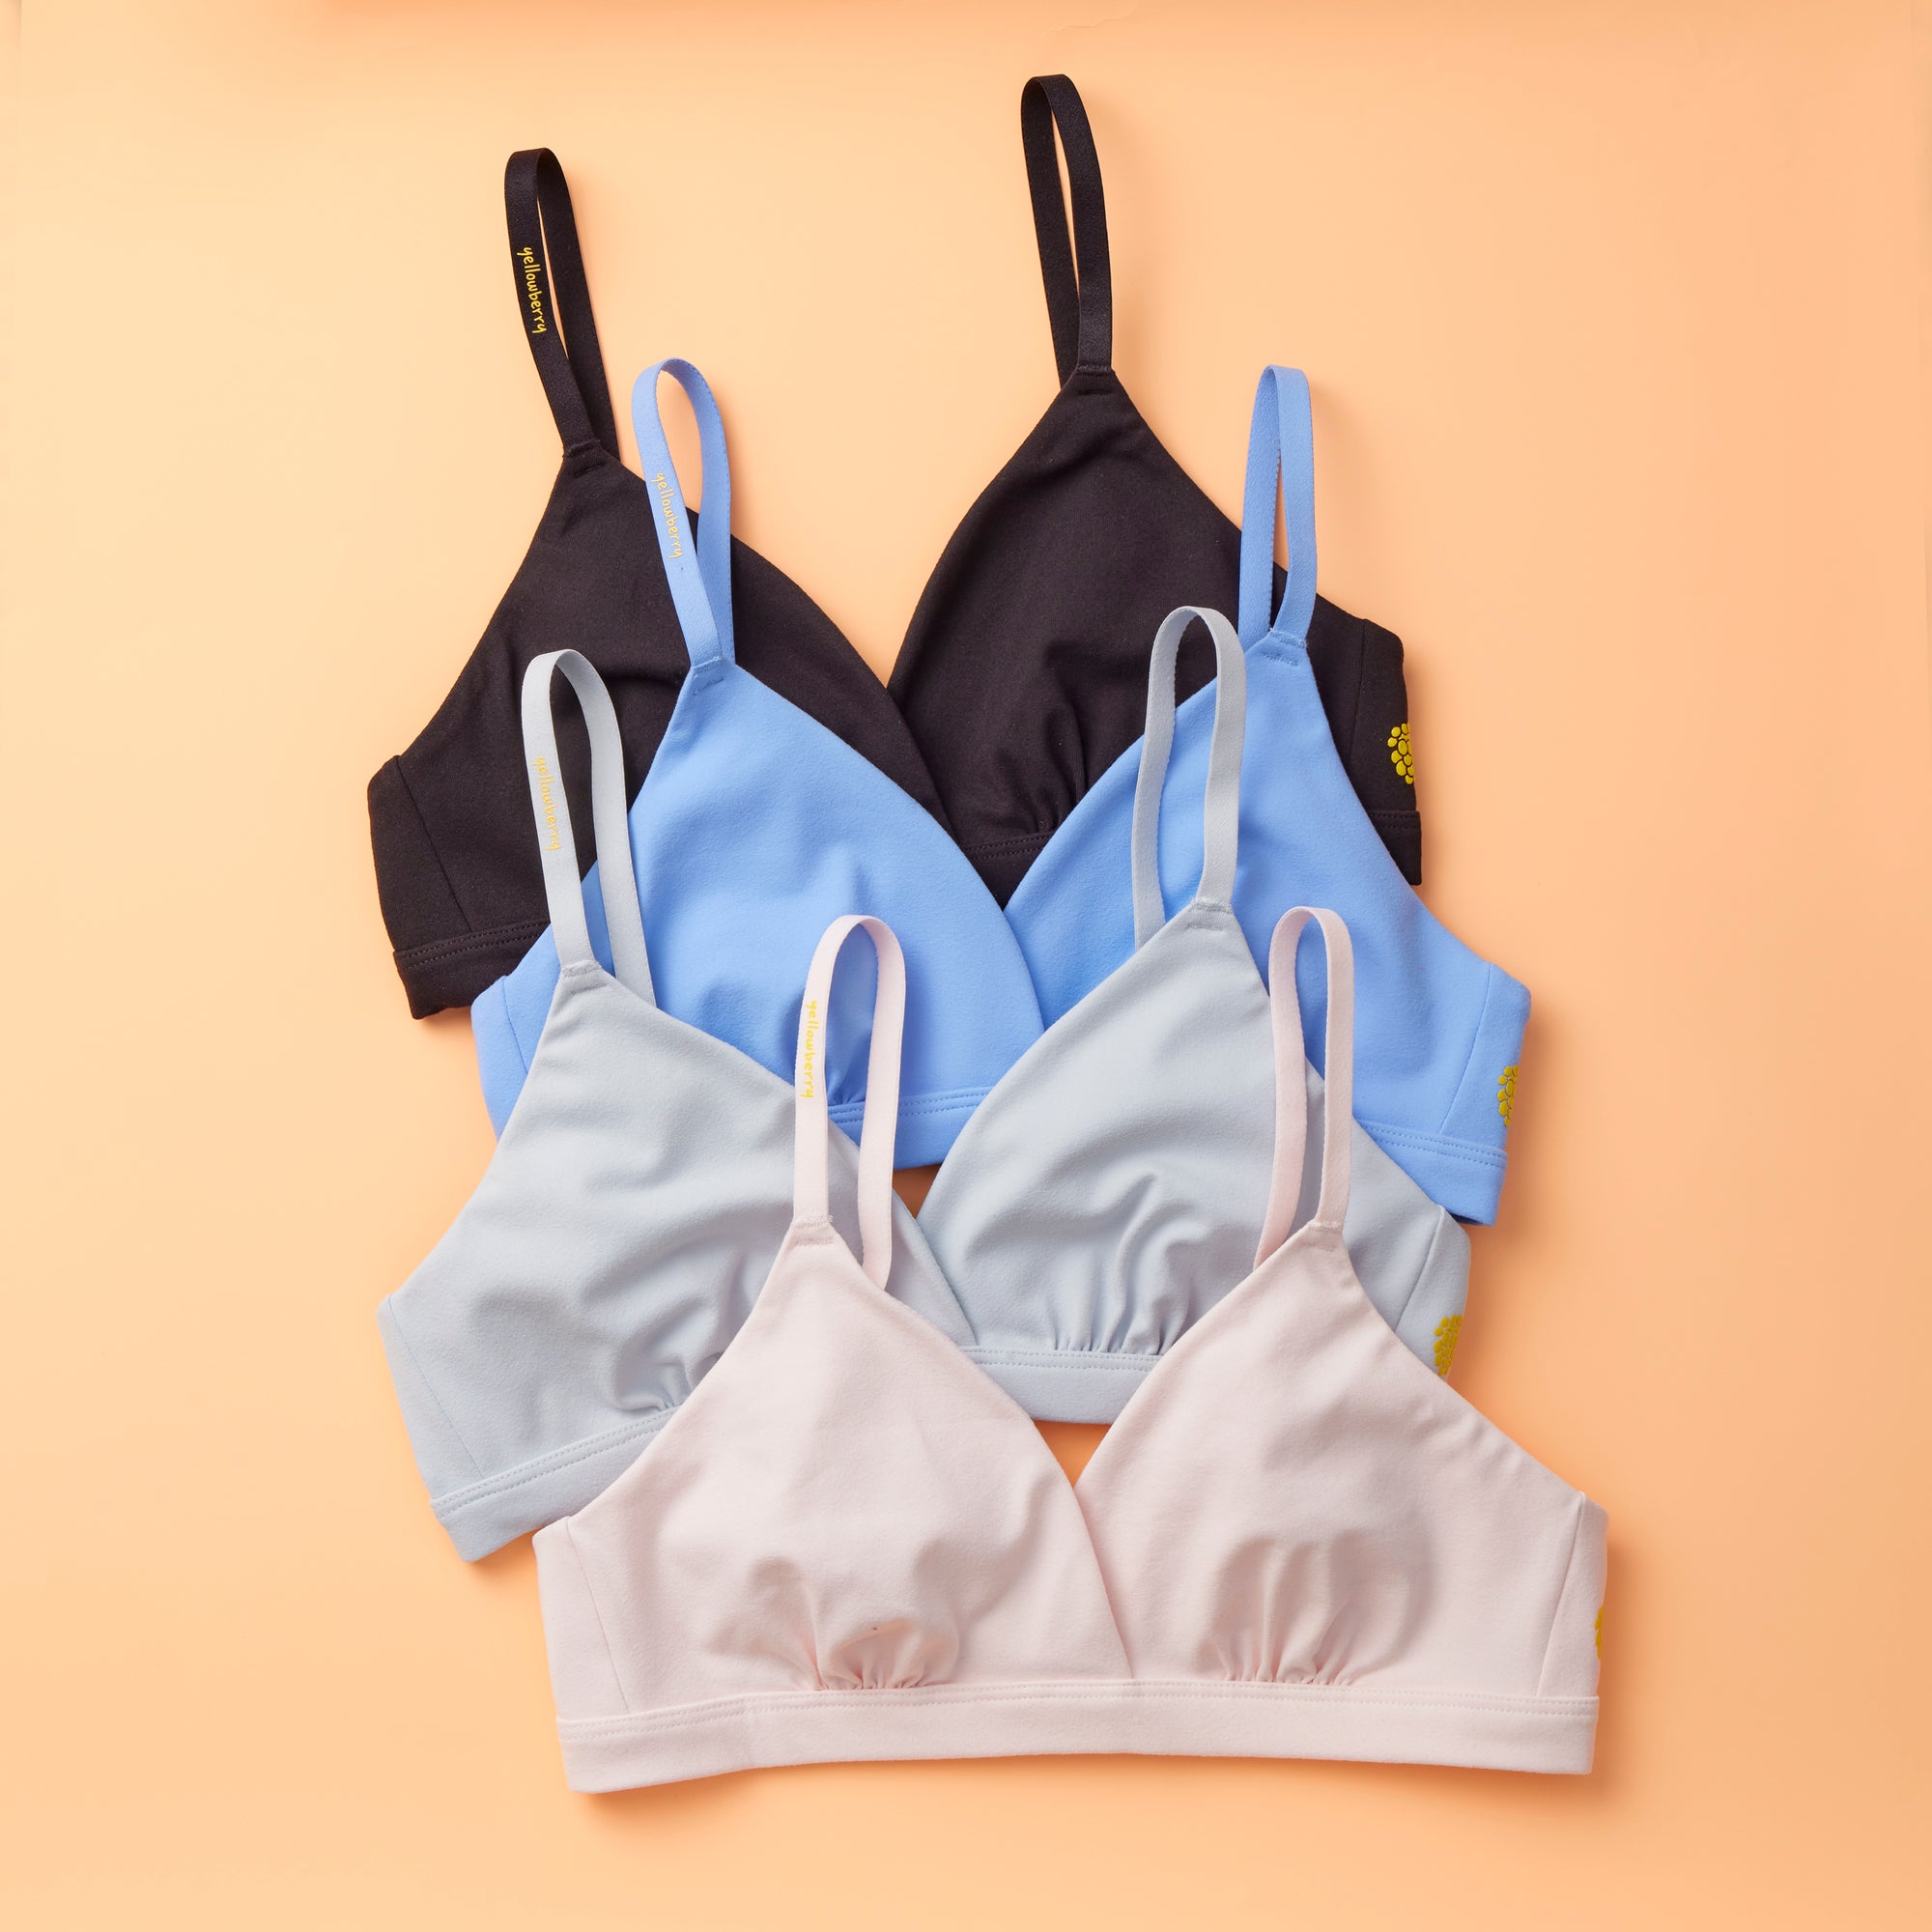 Can Young Girls Wear Underwire Bras? Exploring the Pros and Cons